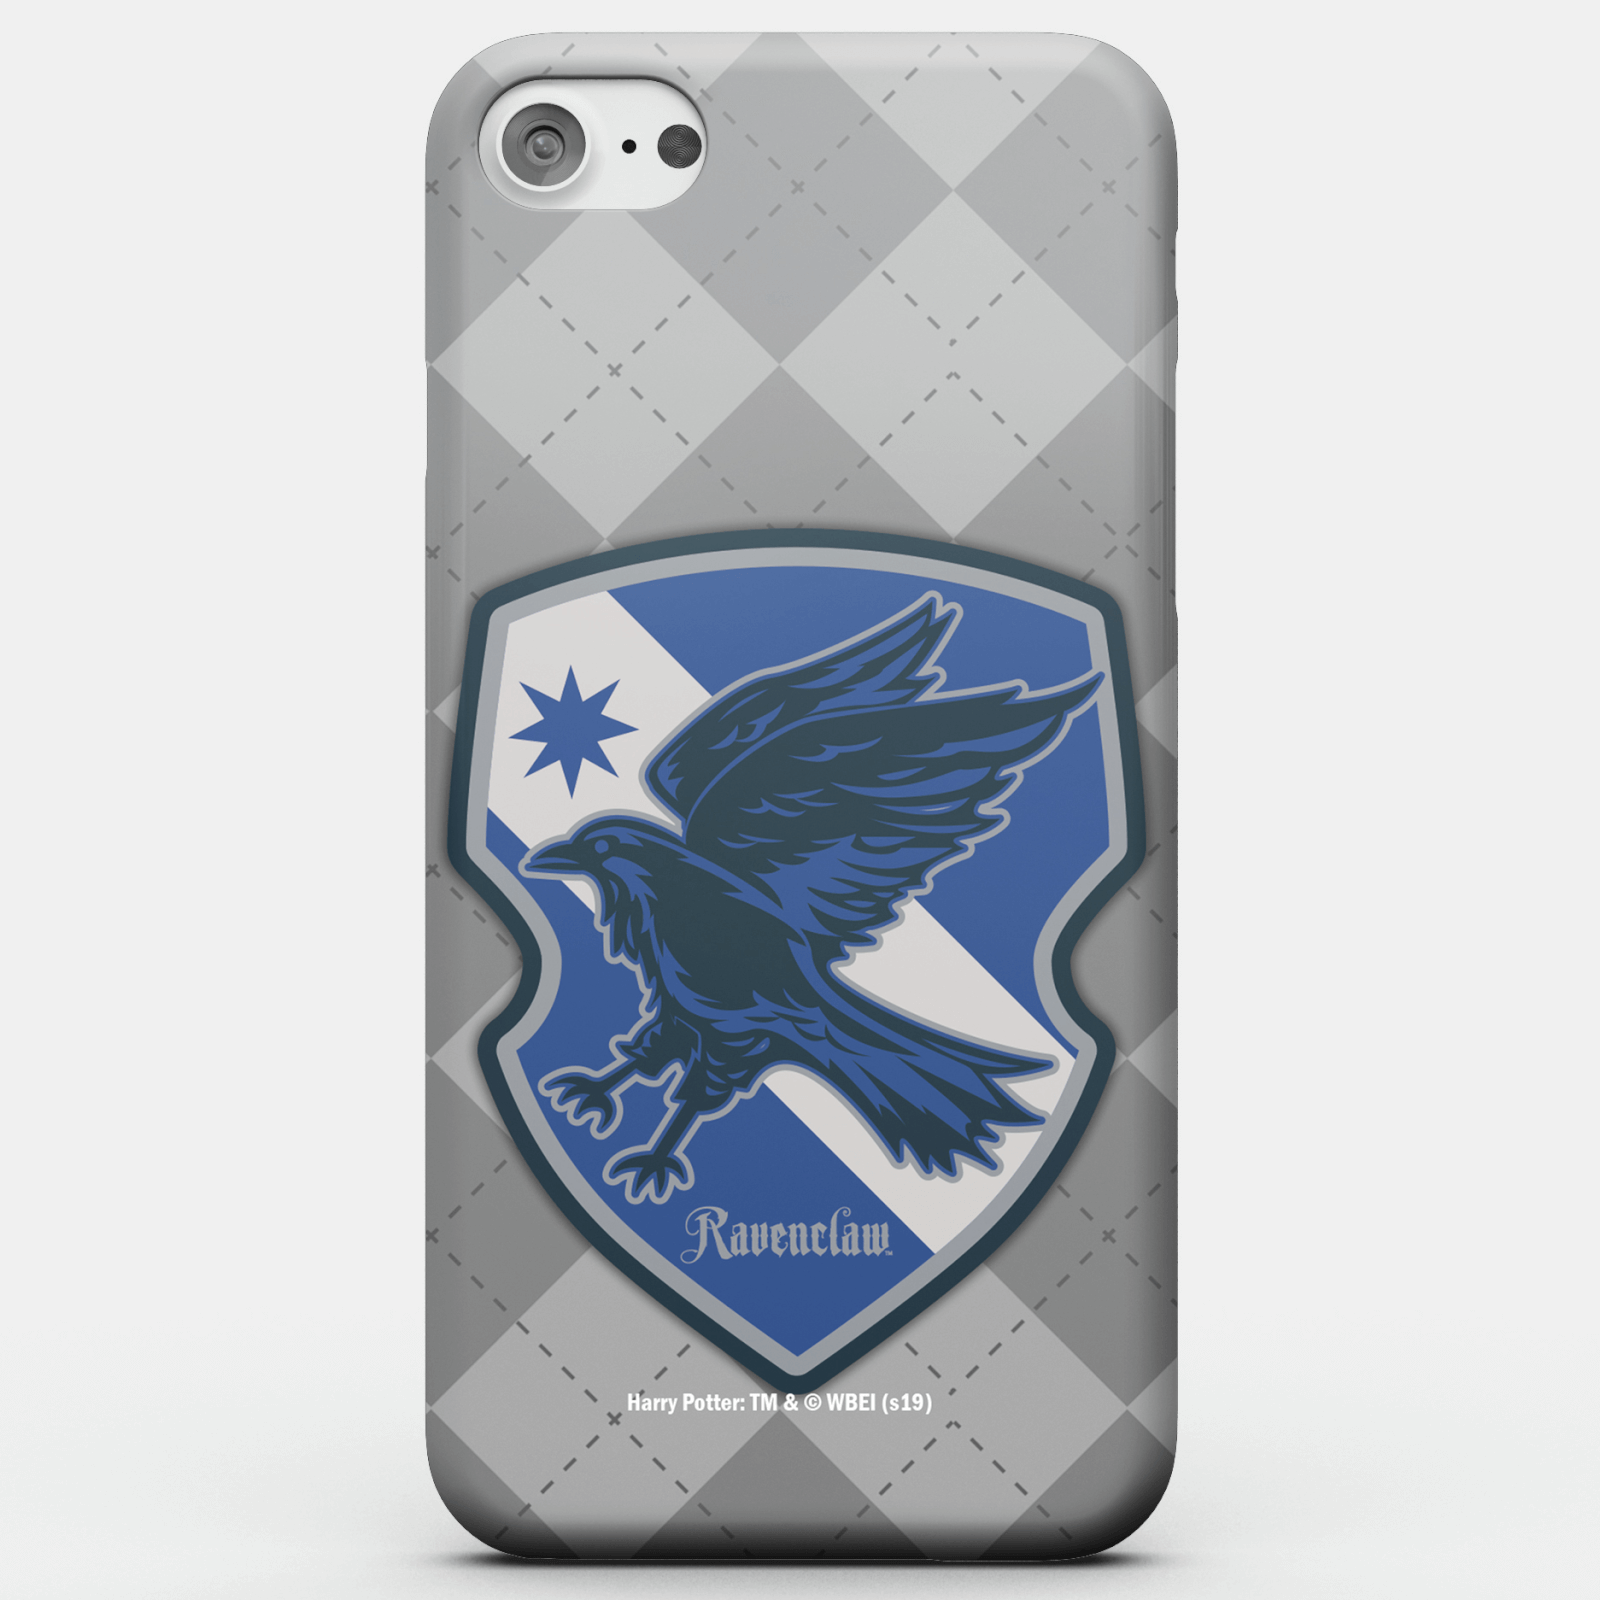 Harry Potter Phonecases Ravenclaw Crest Phone Case for iPhone and Android - Samsung Note 8 - Tough Case - Gloss